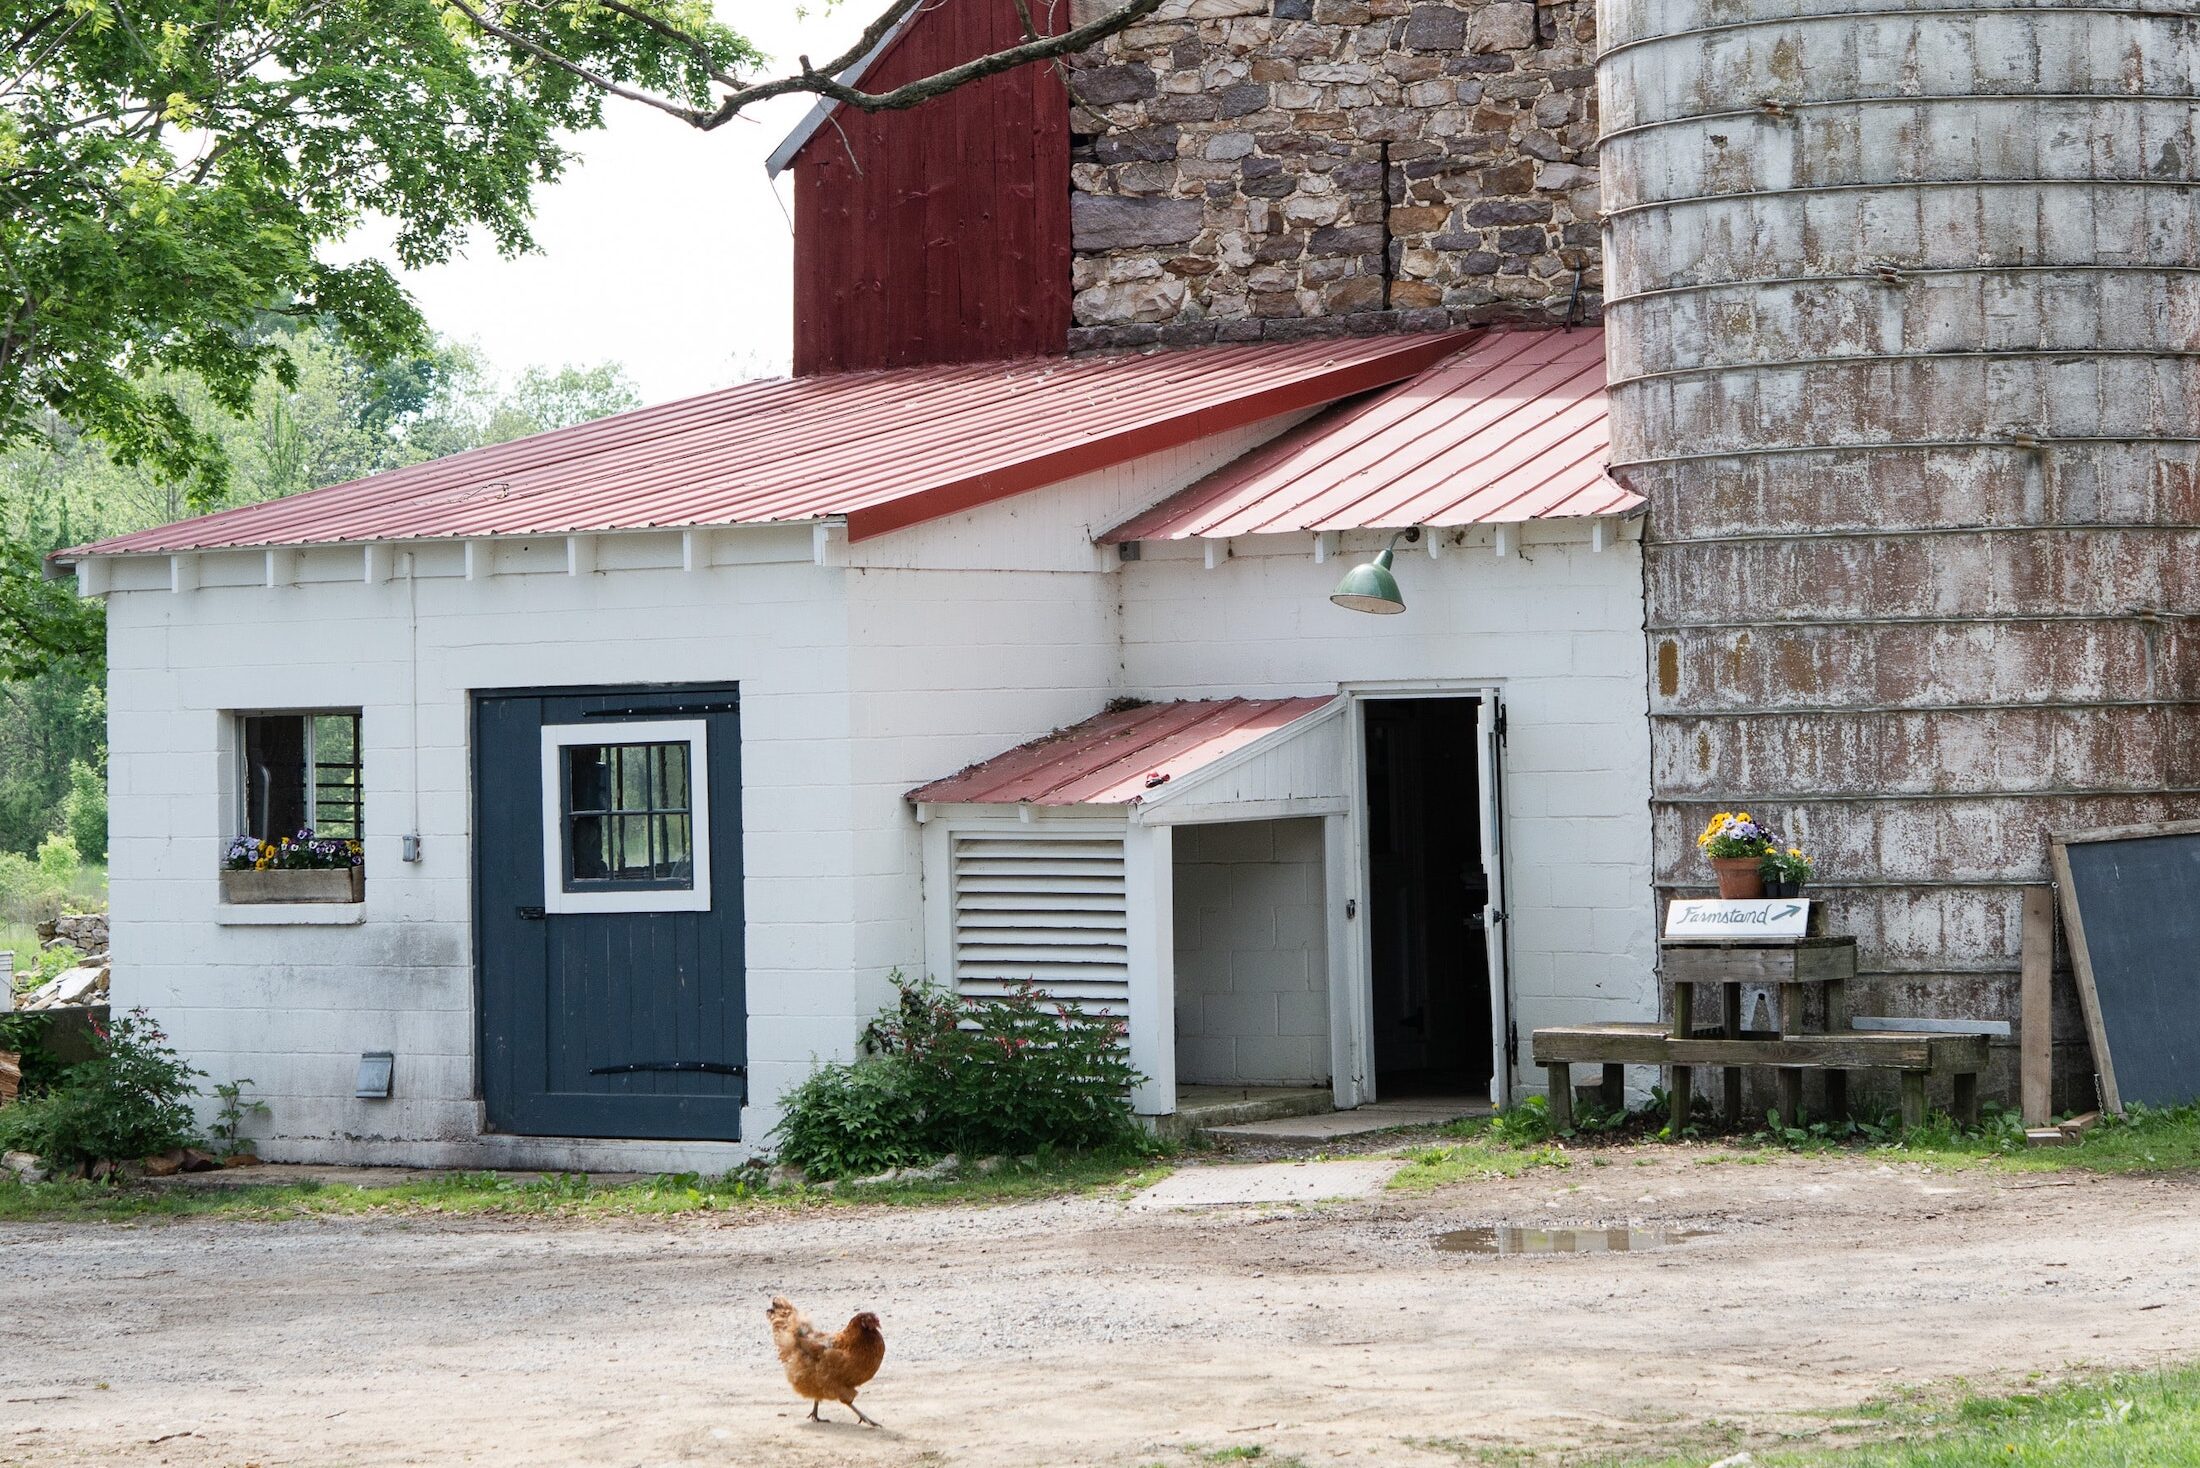 Is Homesteading Right For Me? 12 Questions To Ask Yourself Before You Start